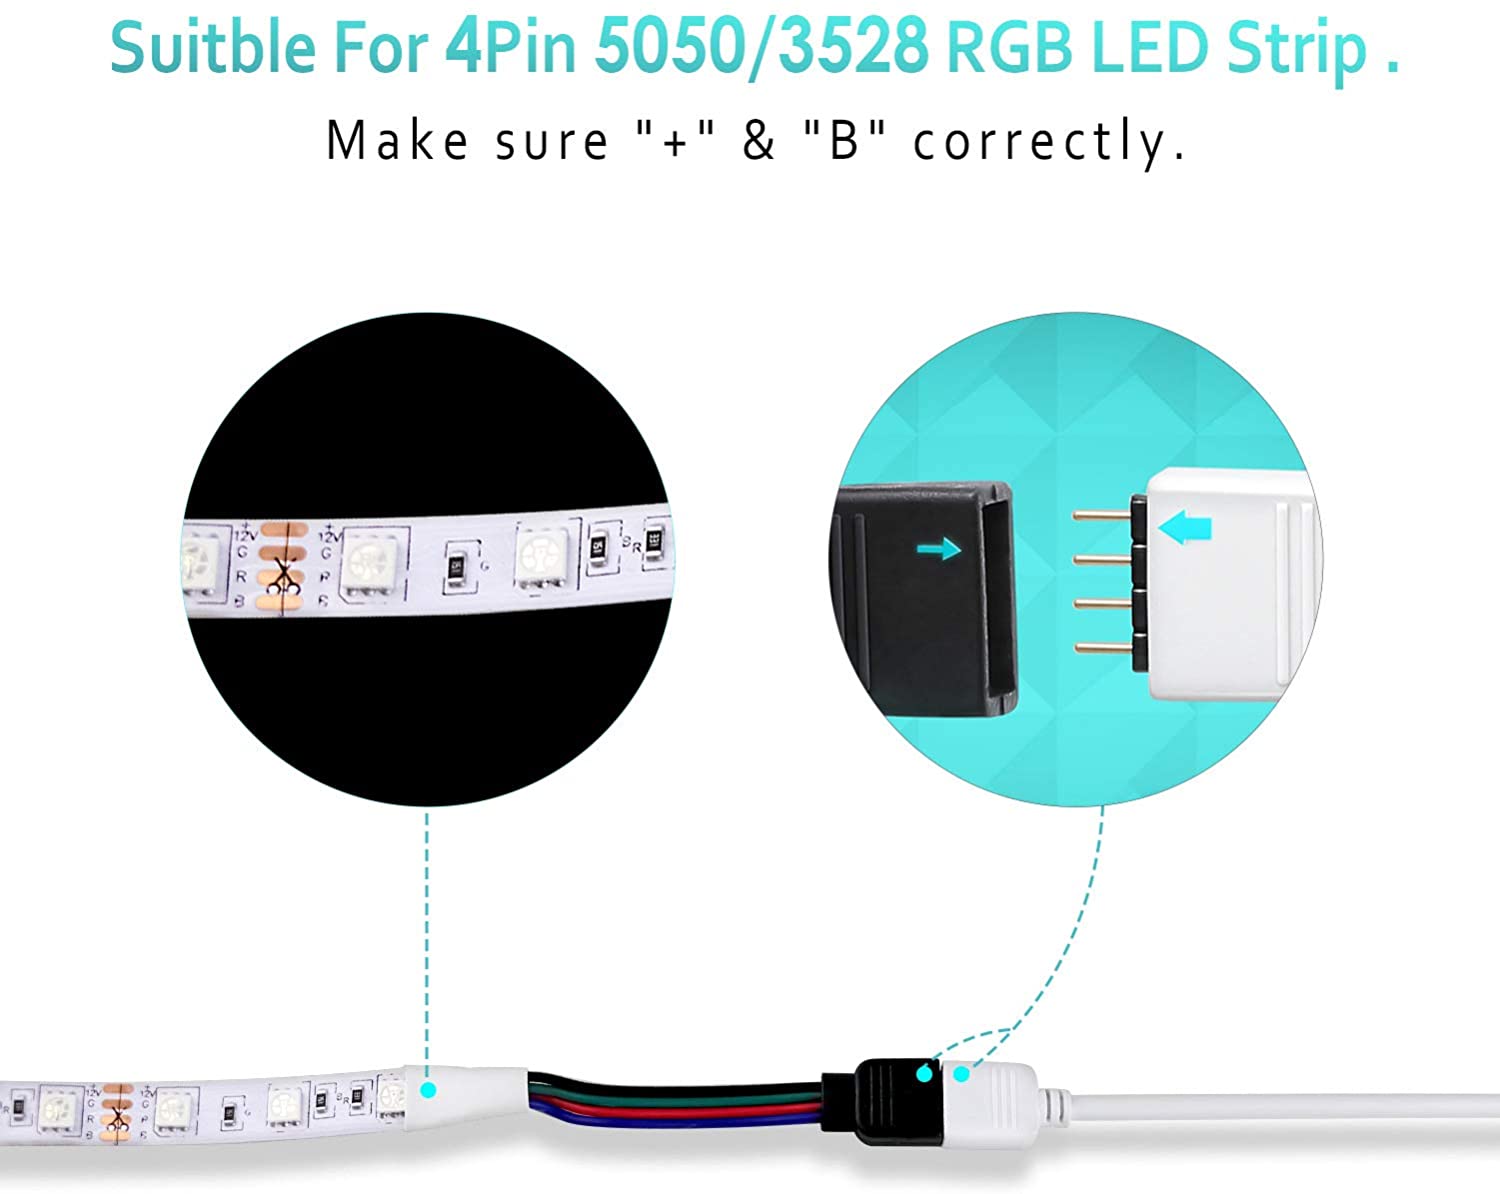 5 Metre DC 12V/24V RGB LED Strip Extension Cable LED Strip Connector 4 Pin Soldless Strip Jumper Cables Kit with Connector for 5050 3528 - ATOM LED